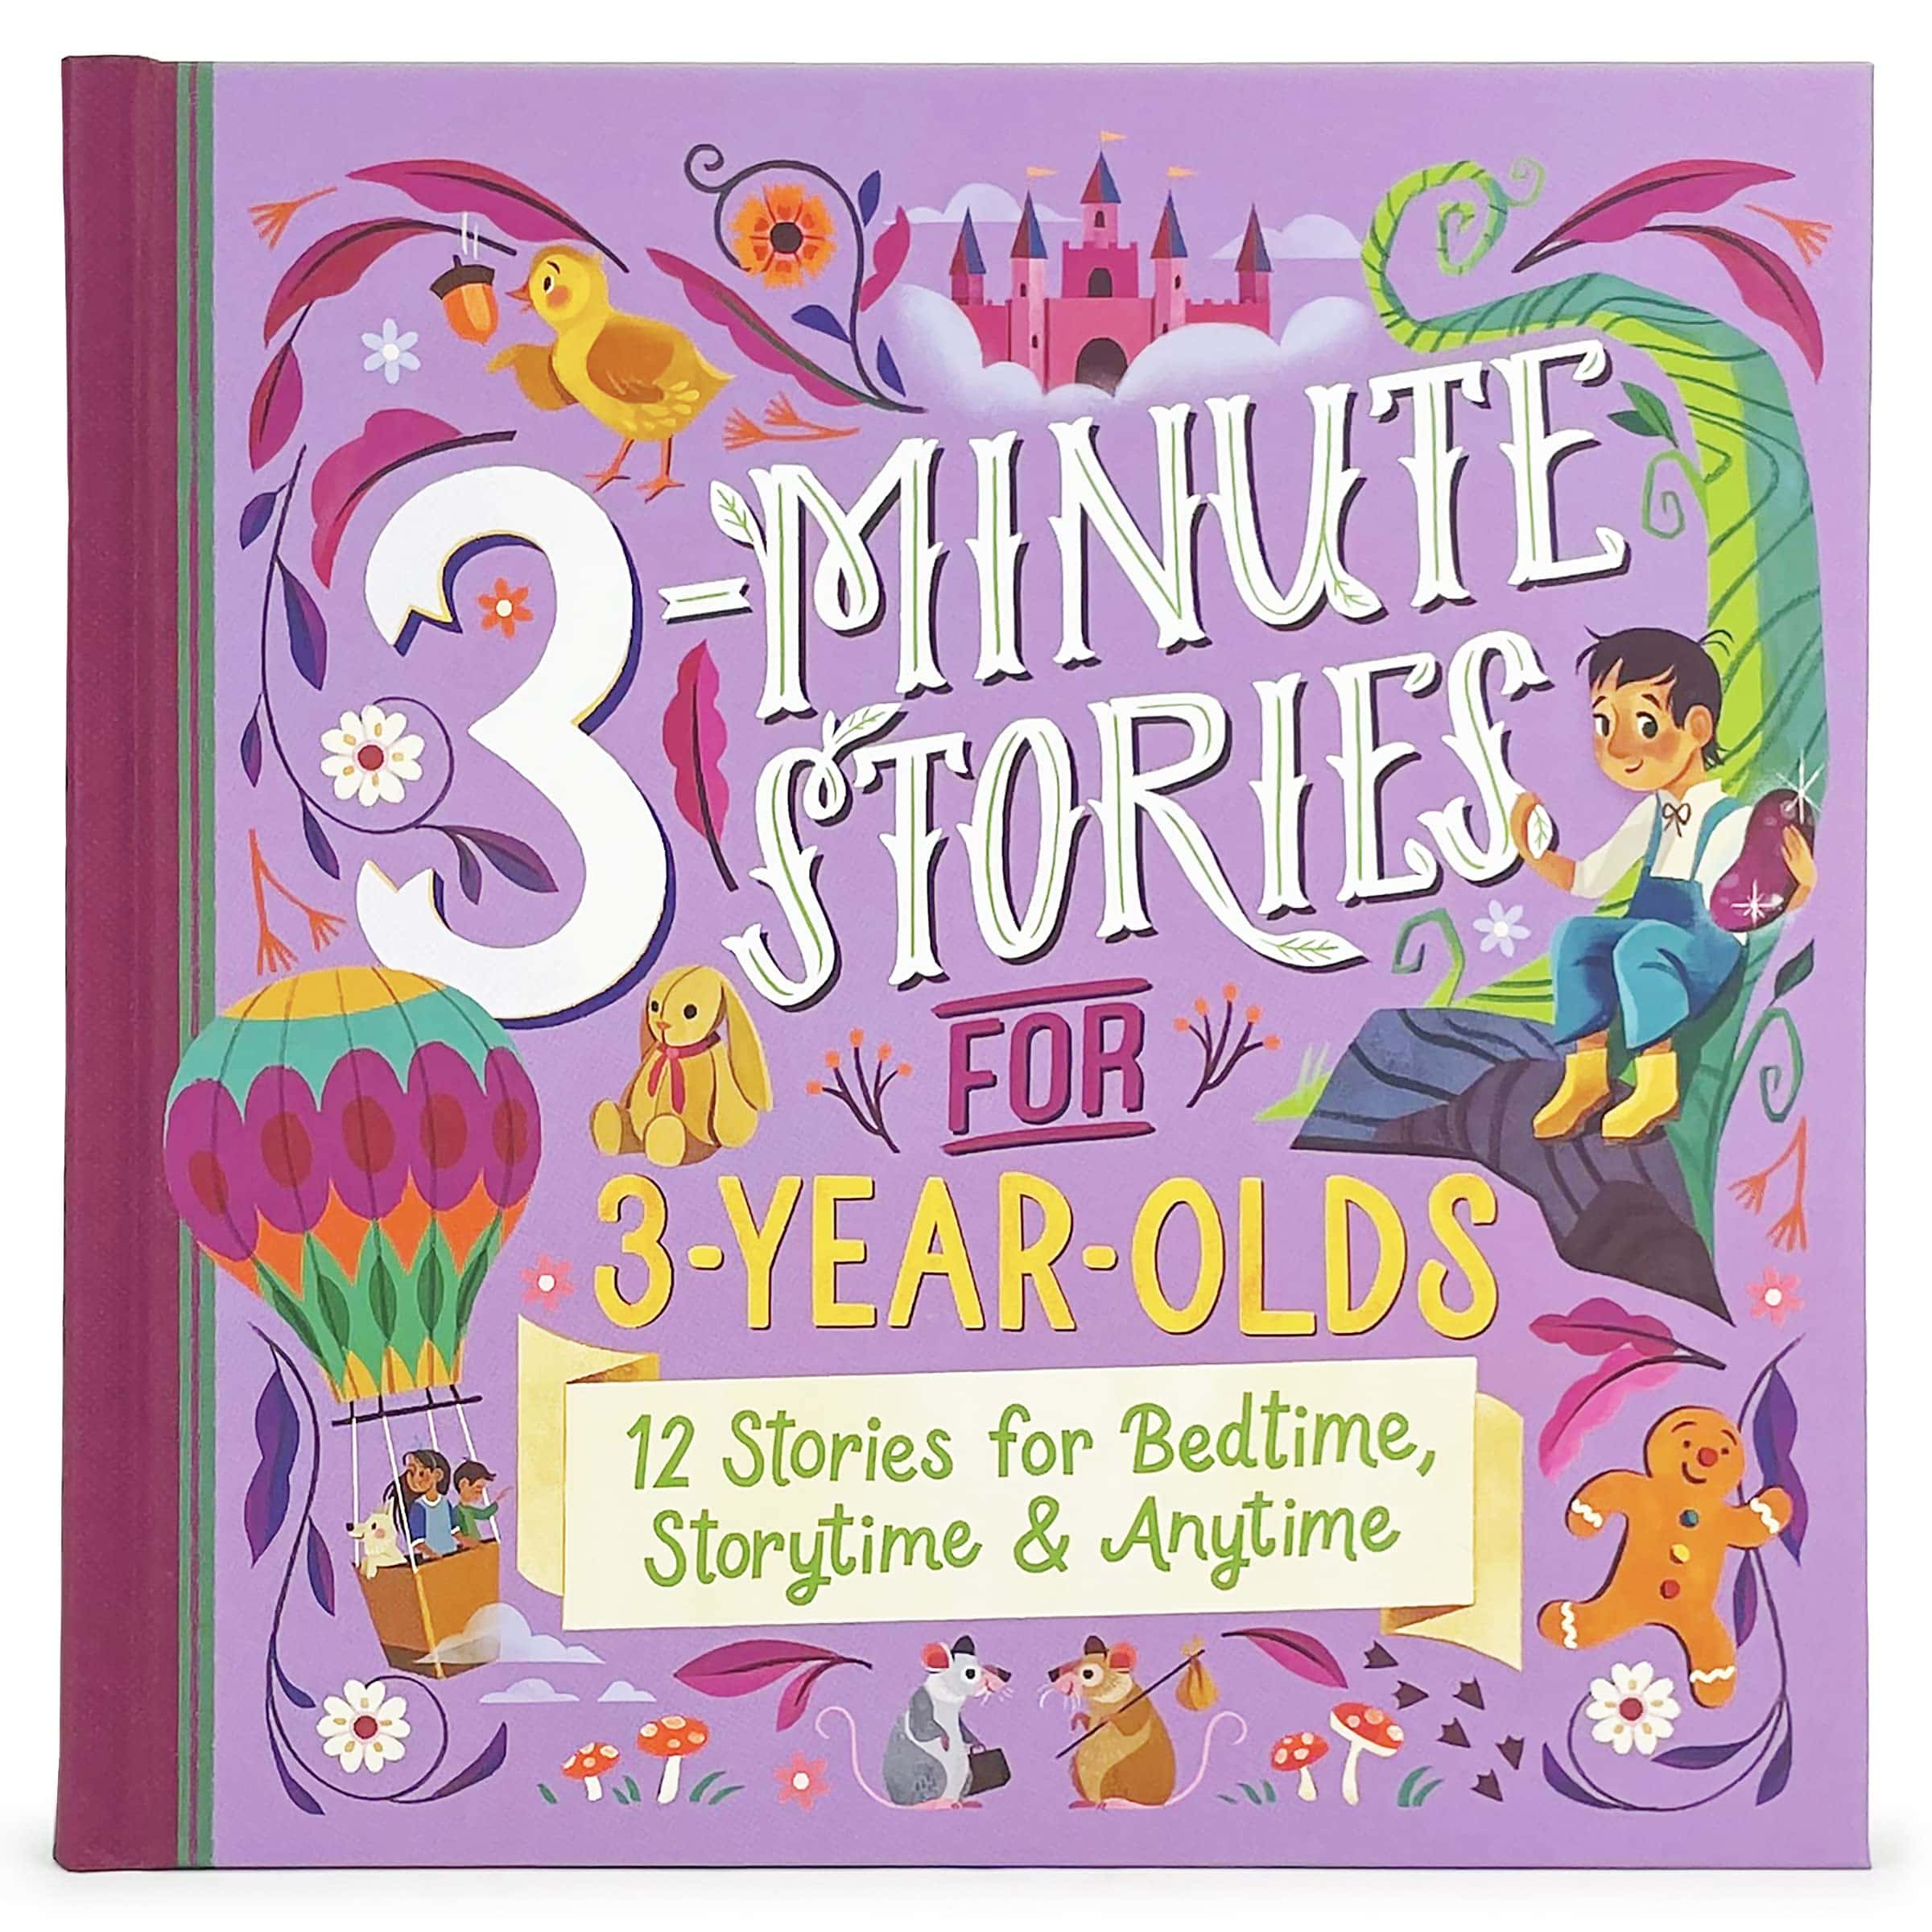 3-Minute Stories for 3-Year-Olds book cover